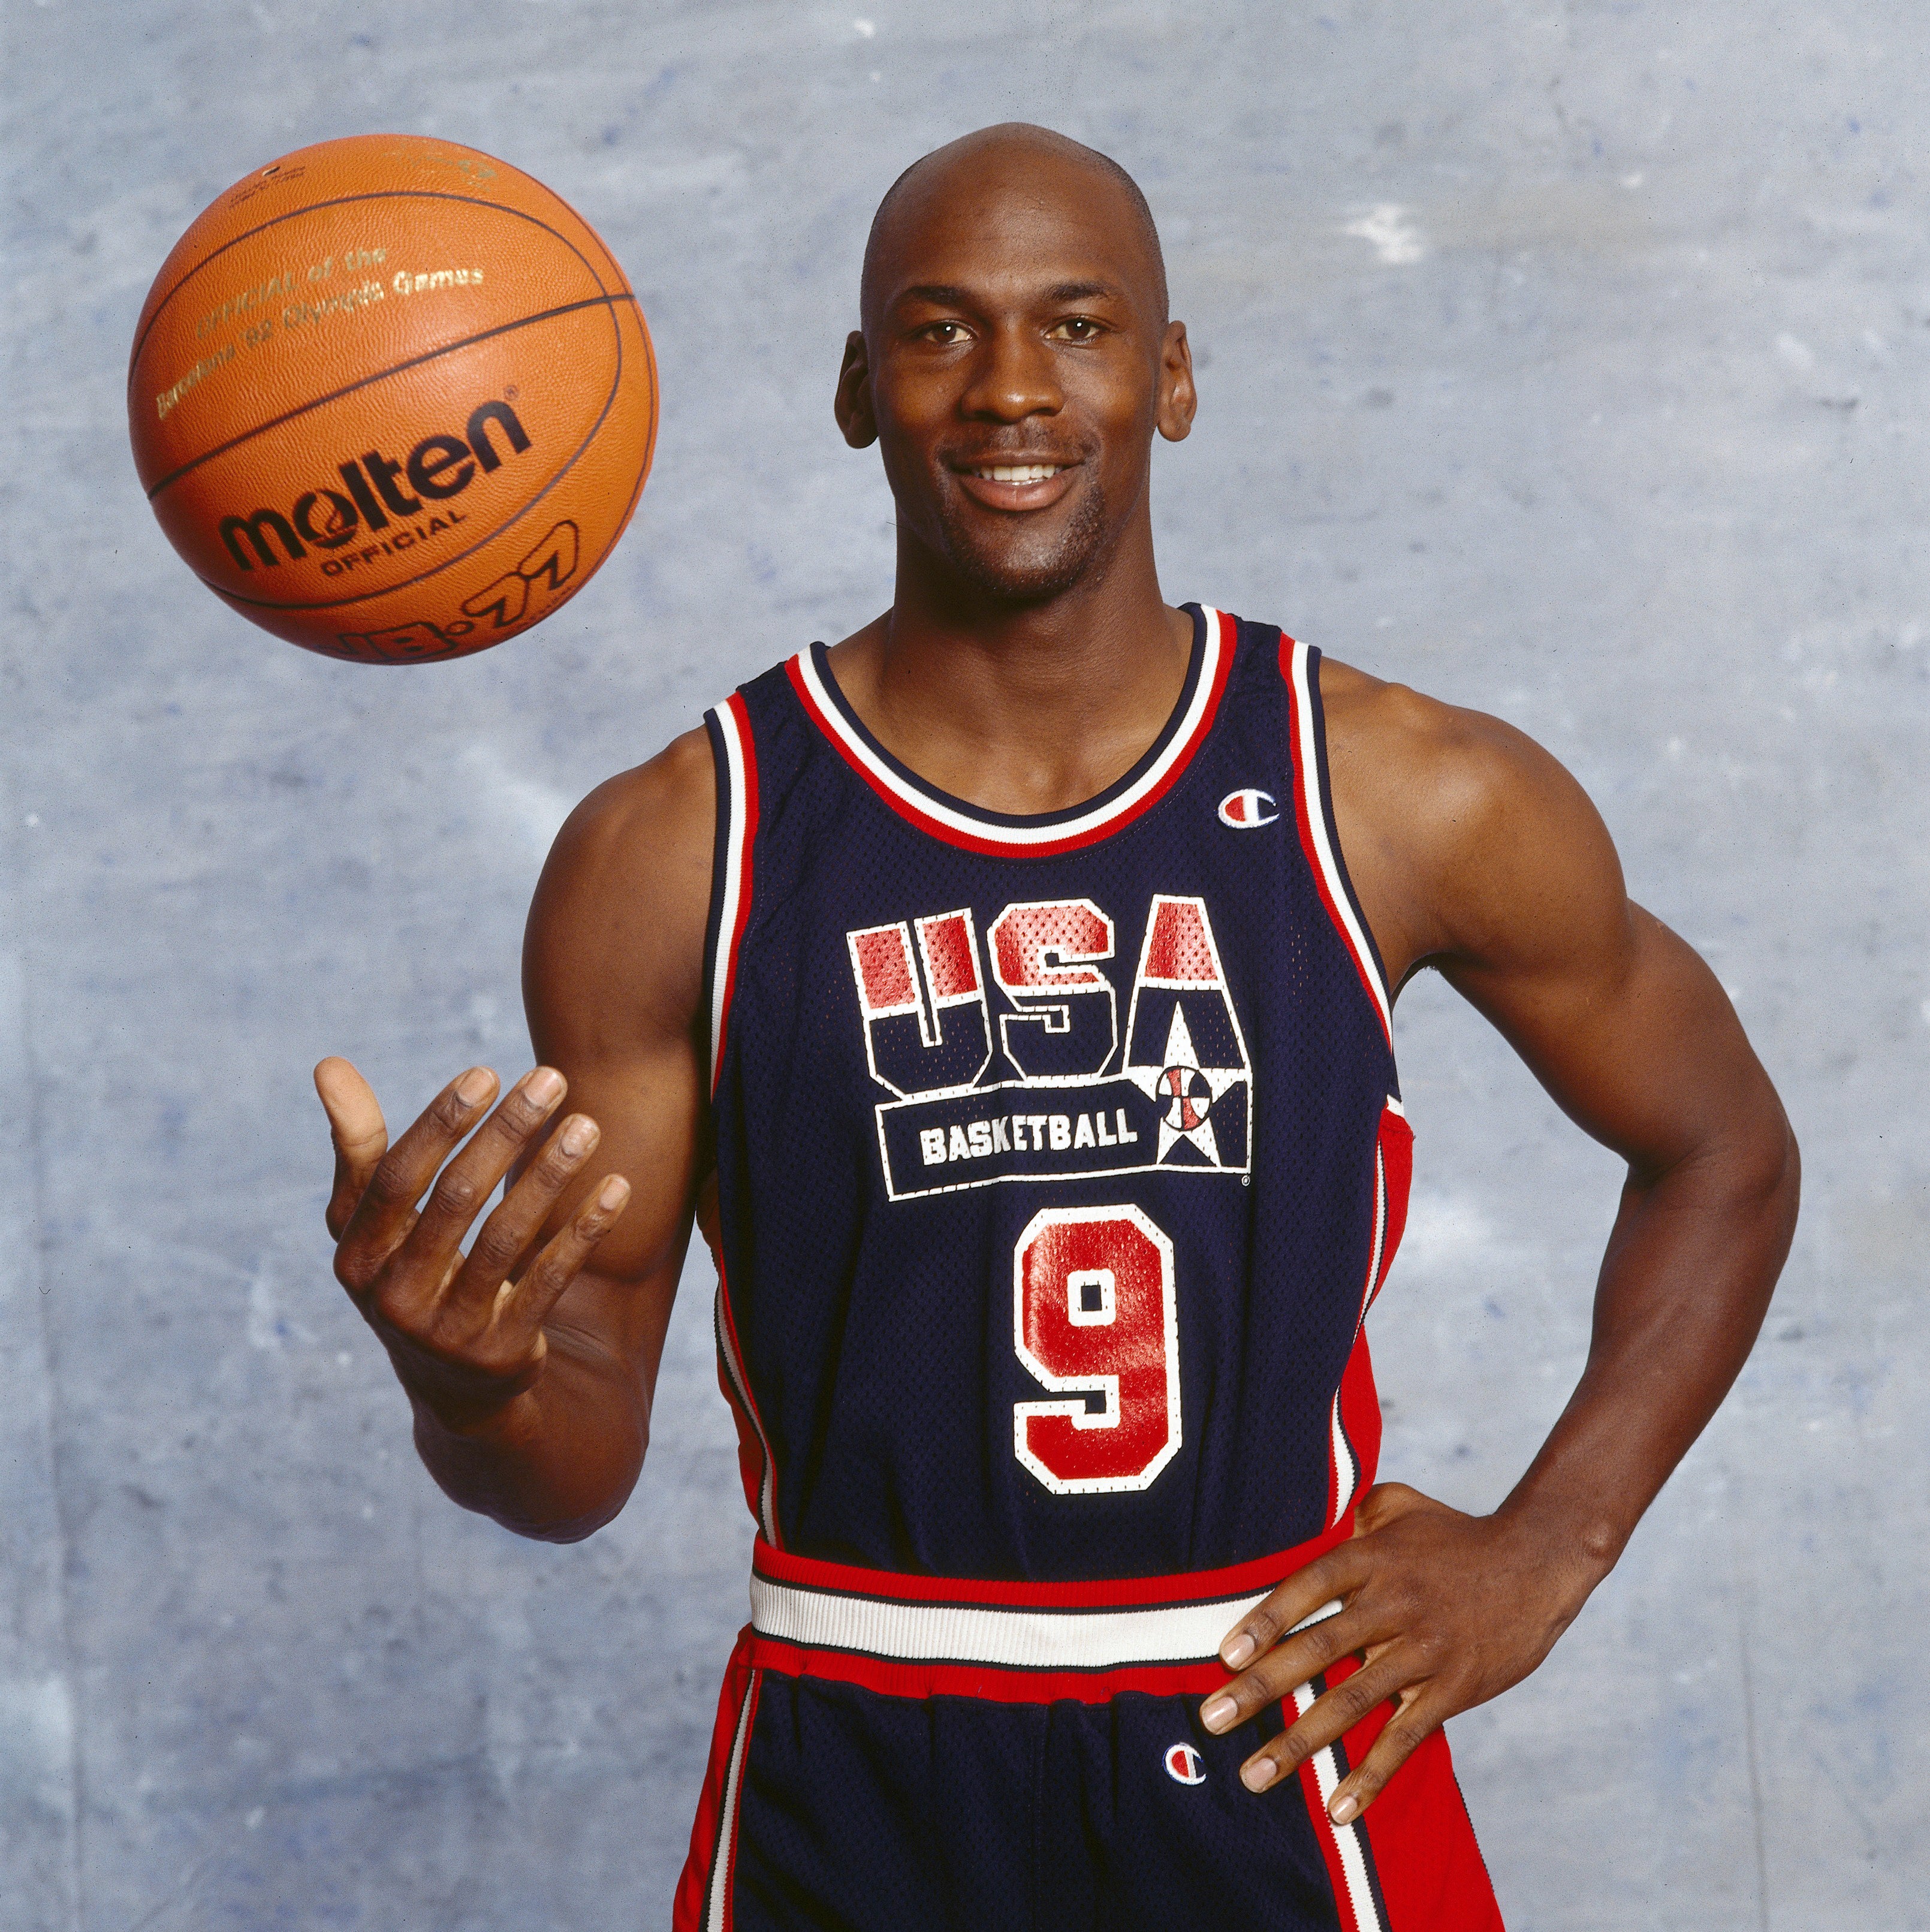 Signed Michael Jordan Olympic Dream Team jersey auctioned for